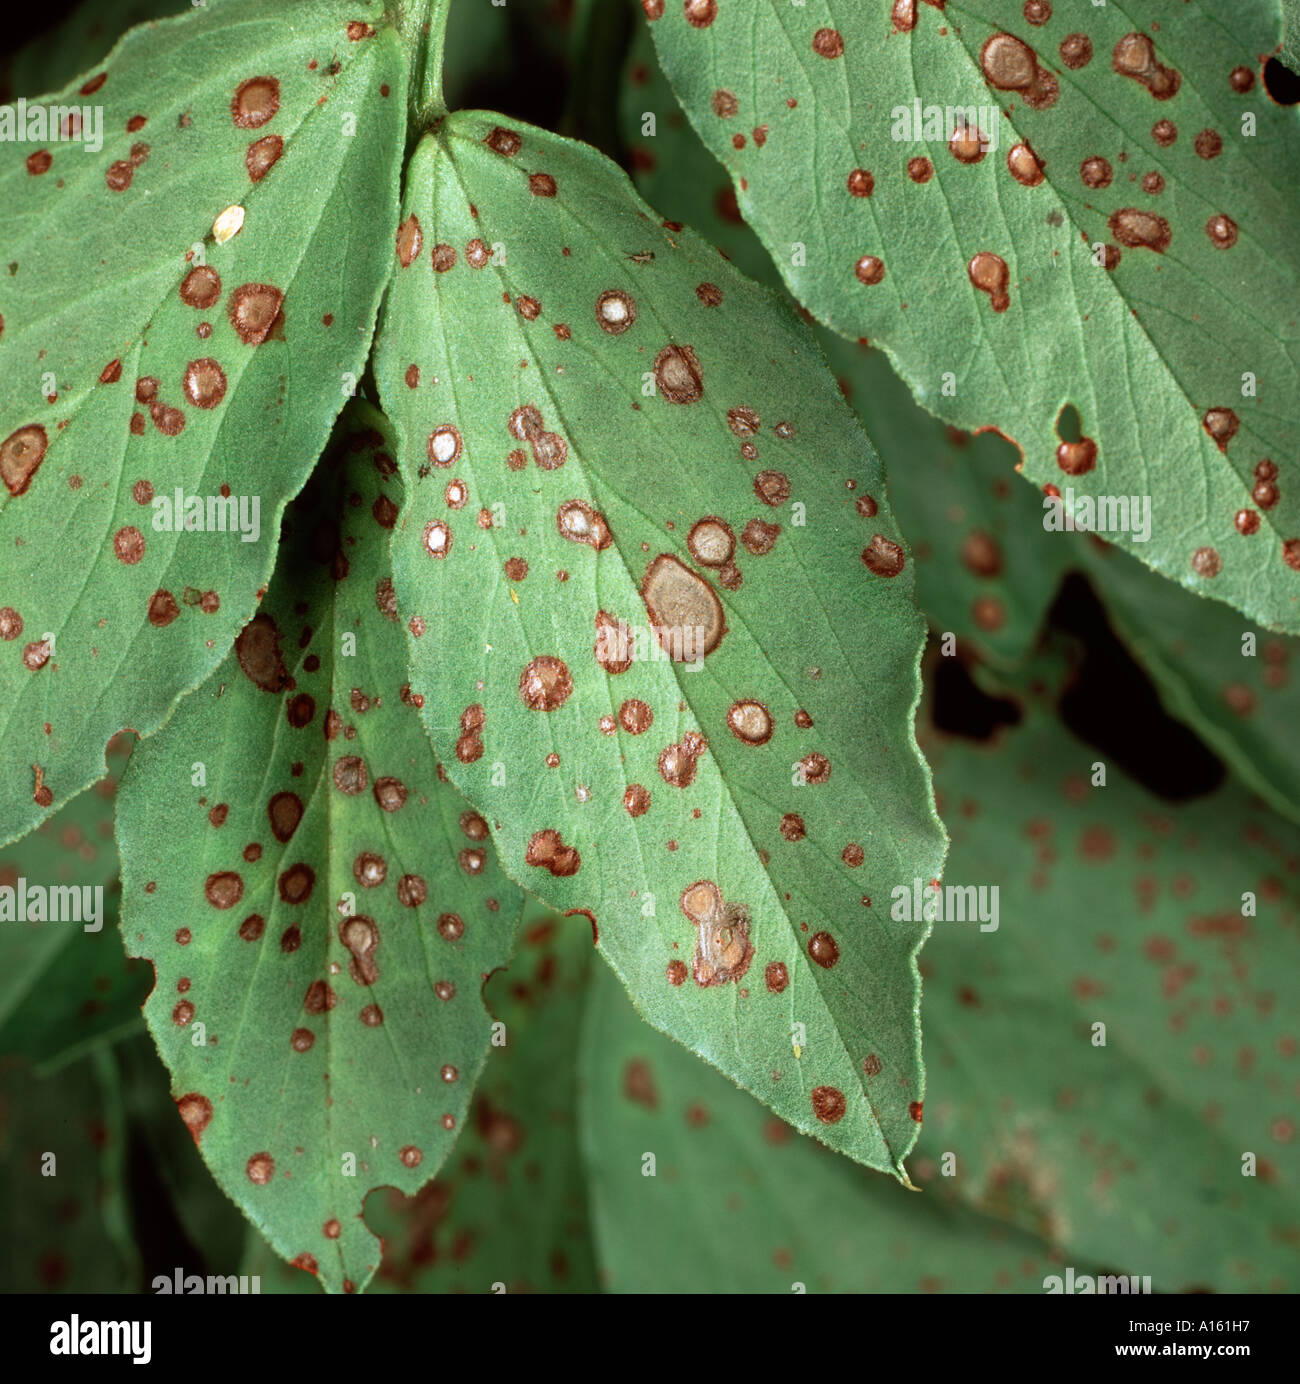 Chocolate spot Botrytis fabae lesions on field broad bean leaf Stock Photo